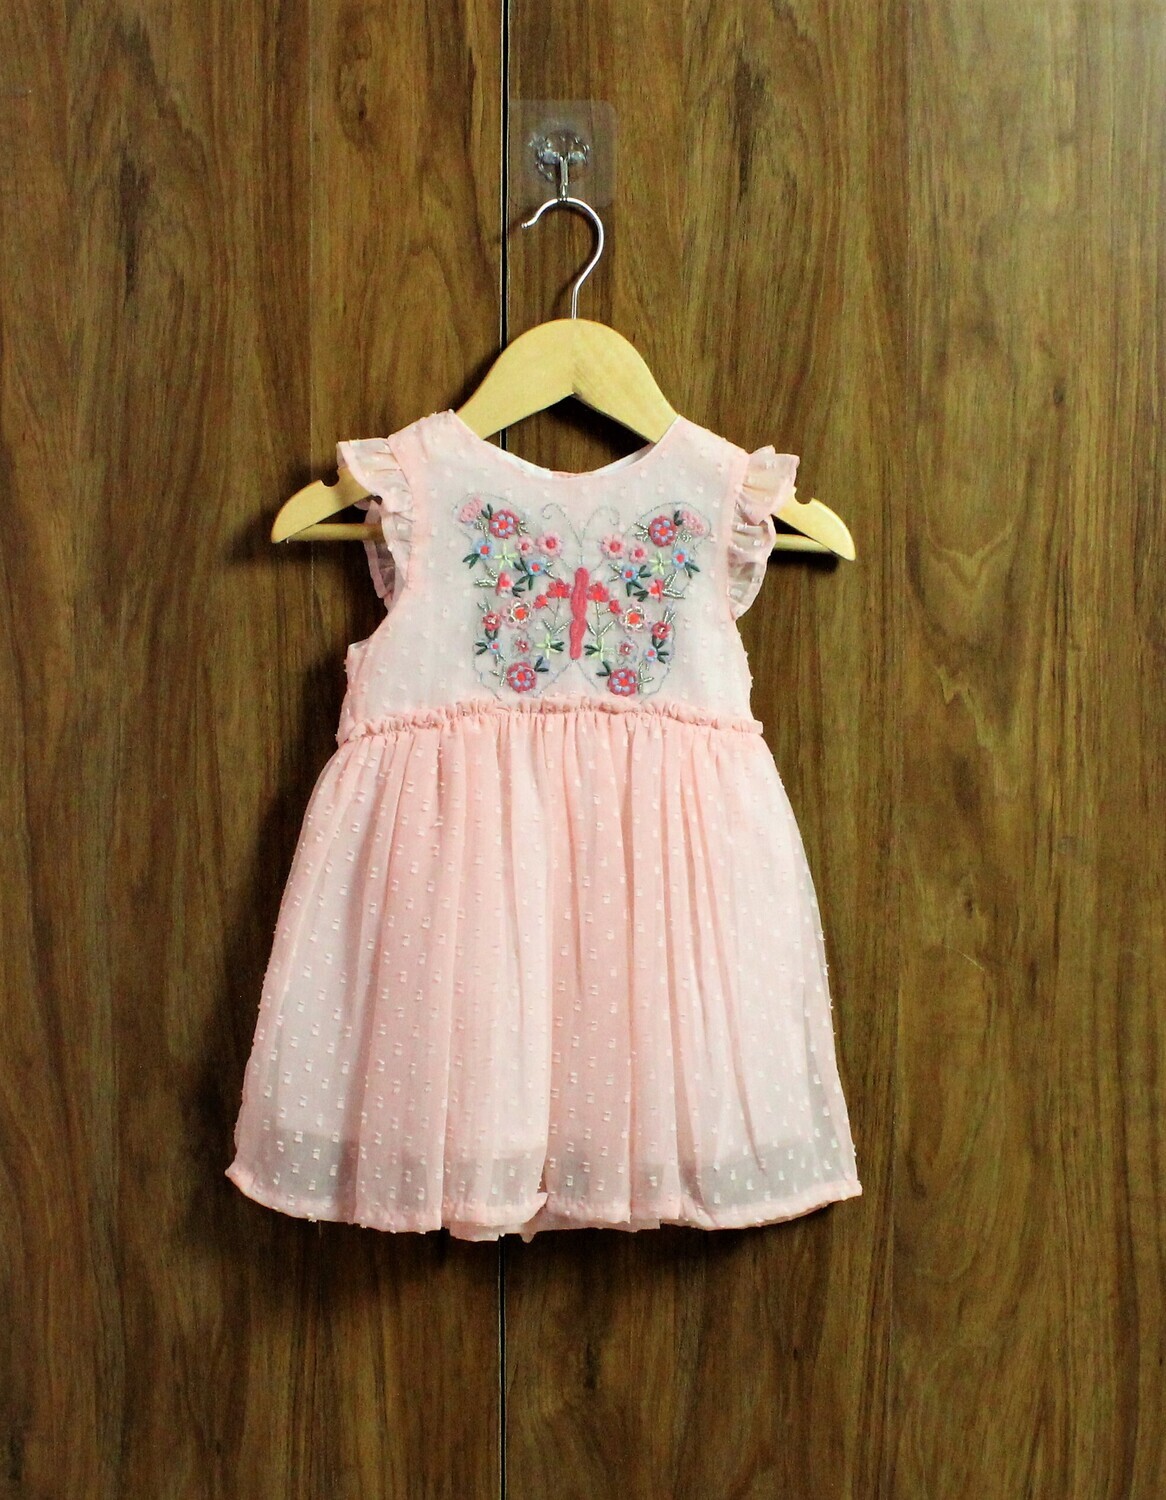 Butterfly Ebm dress with extra comfort(1 to 7-8 yrs.)